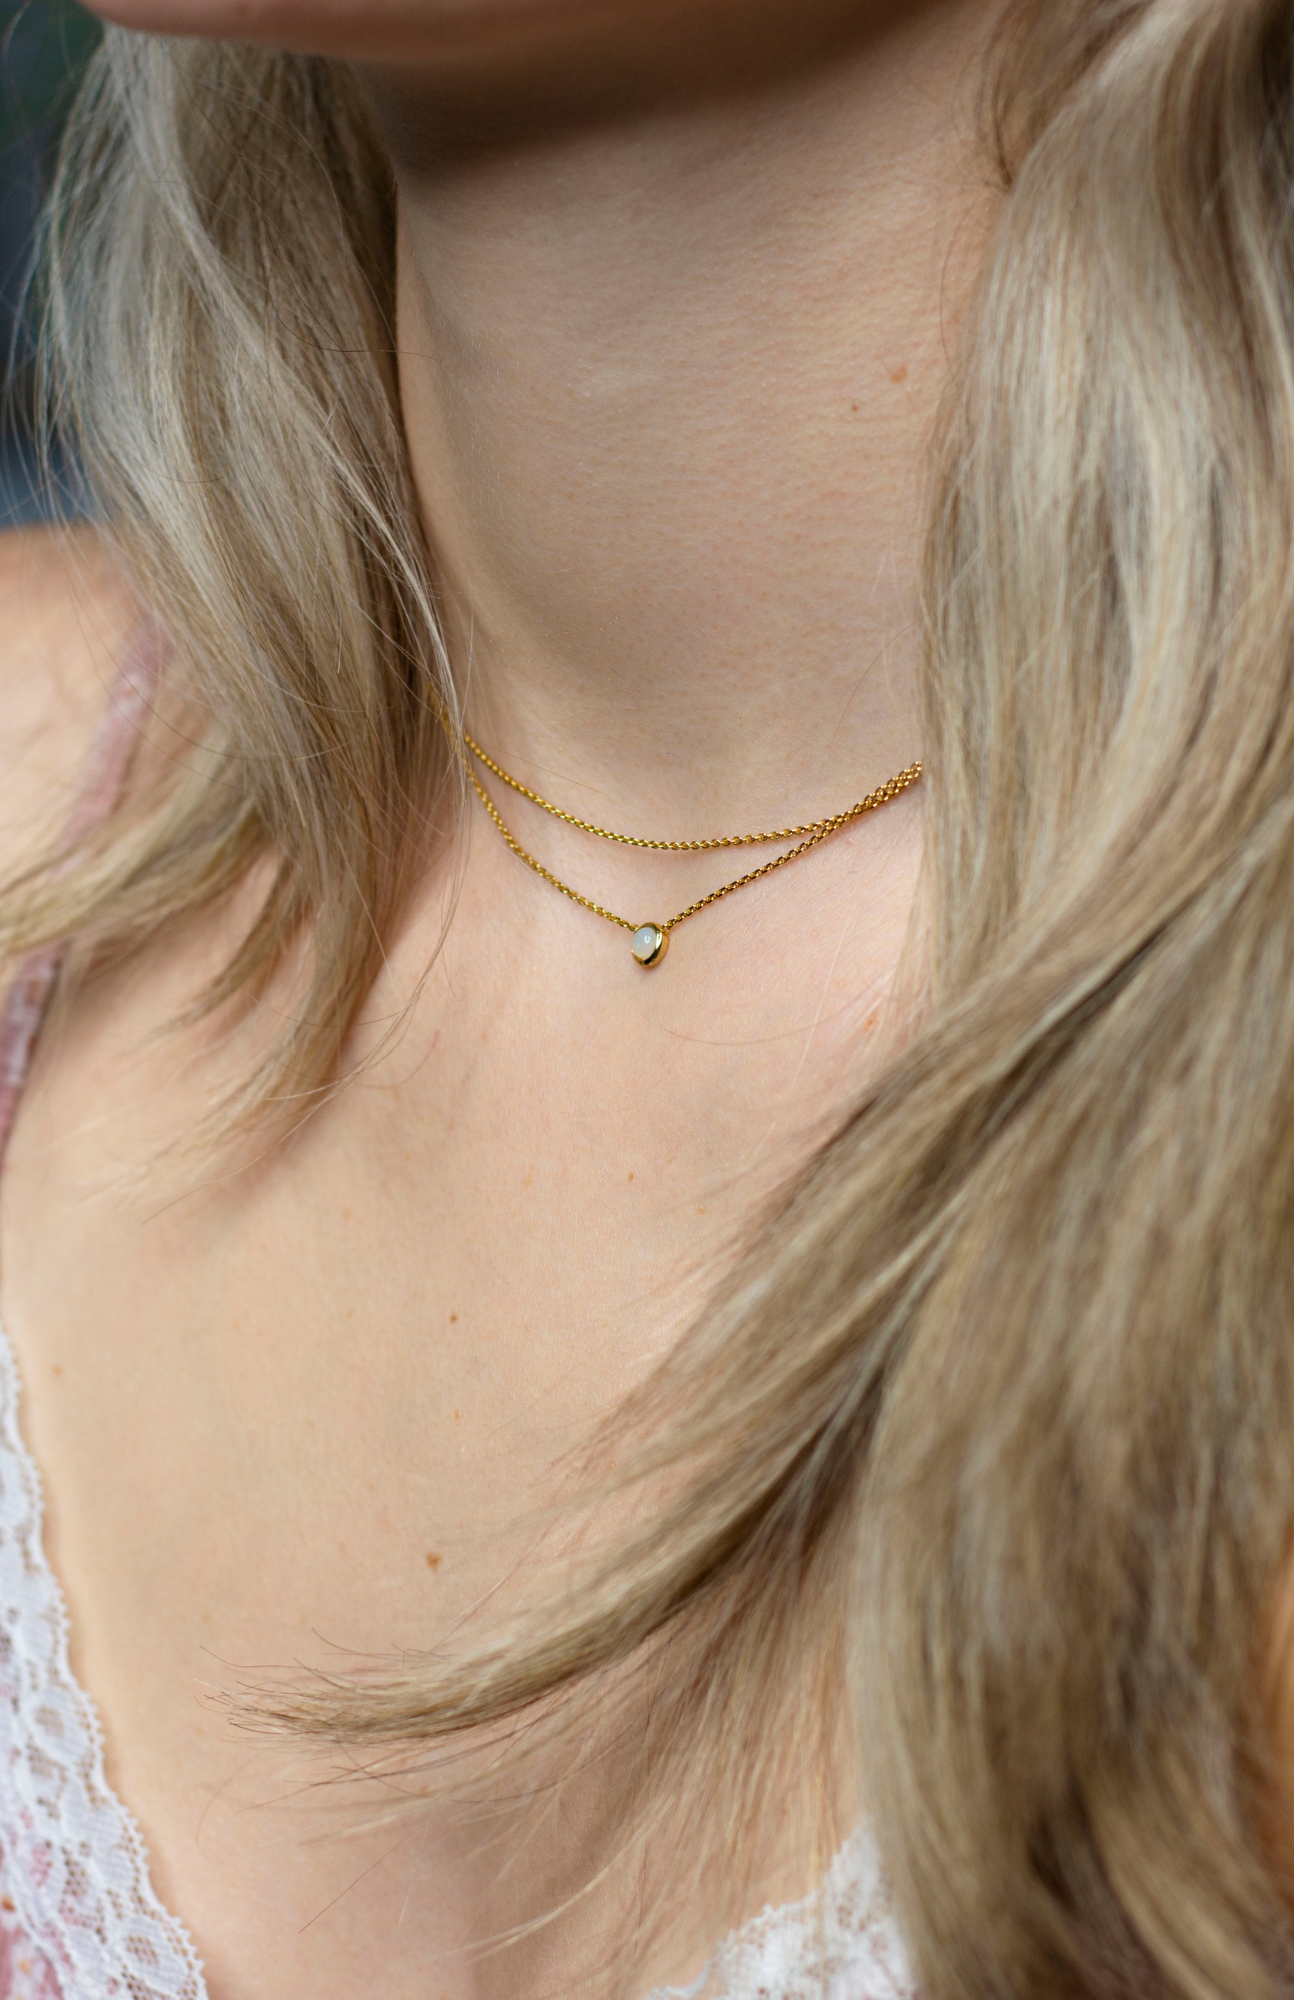 Layered Gold Vermeil Necklace featuring a Floating Opal Stone on an Infinity Symbol Design.